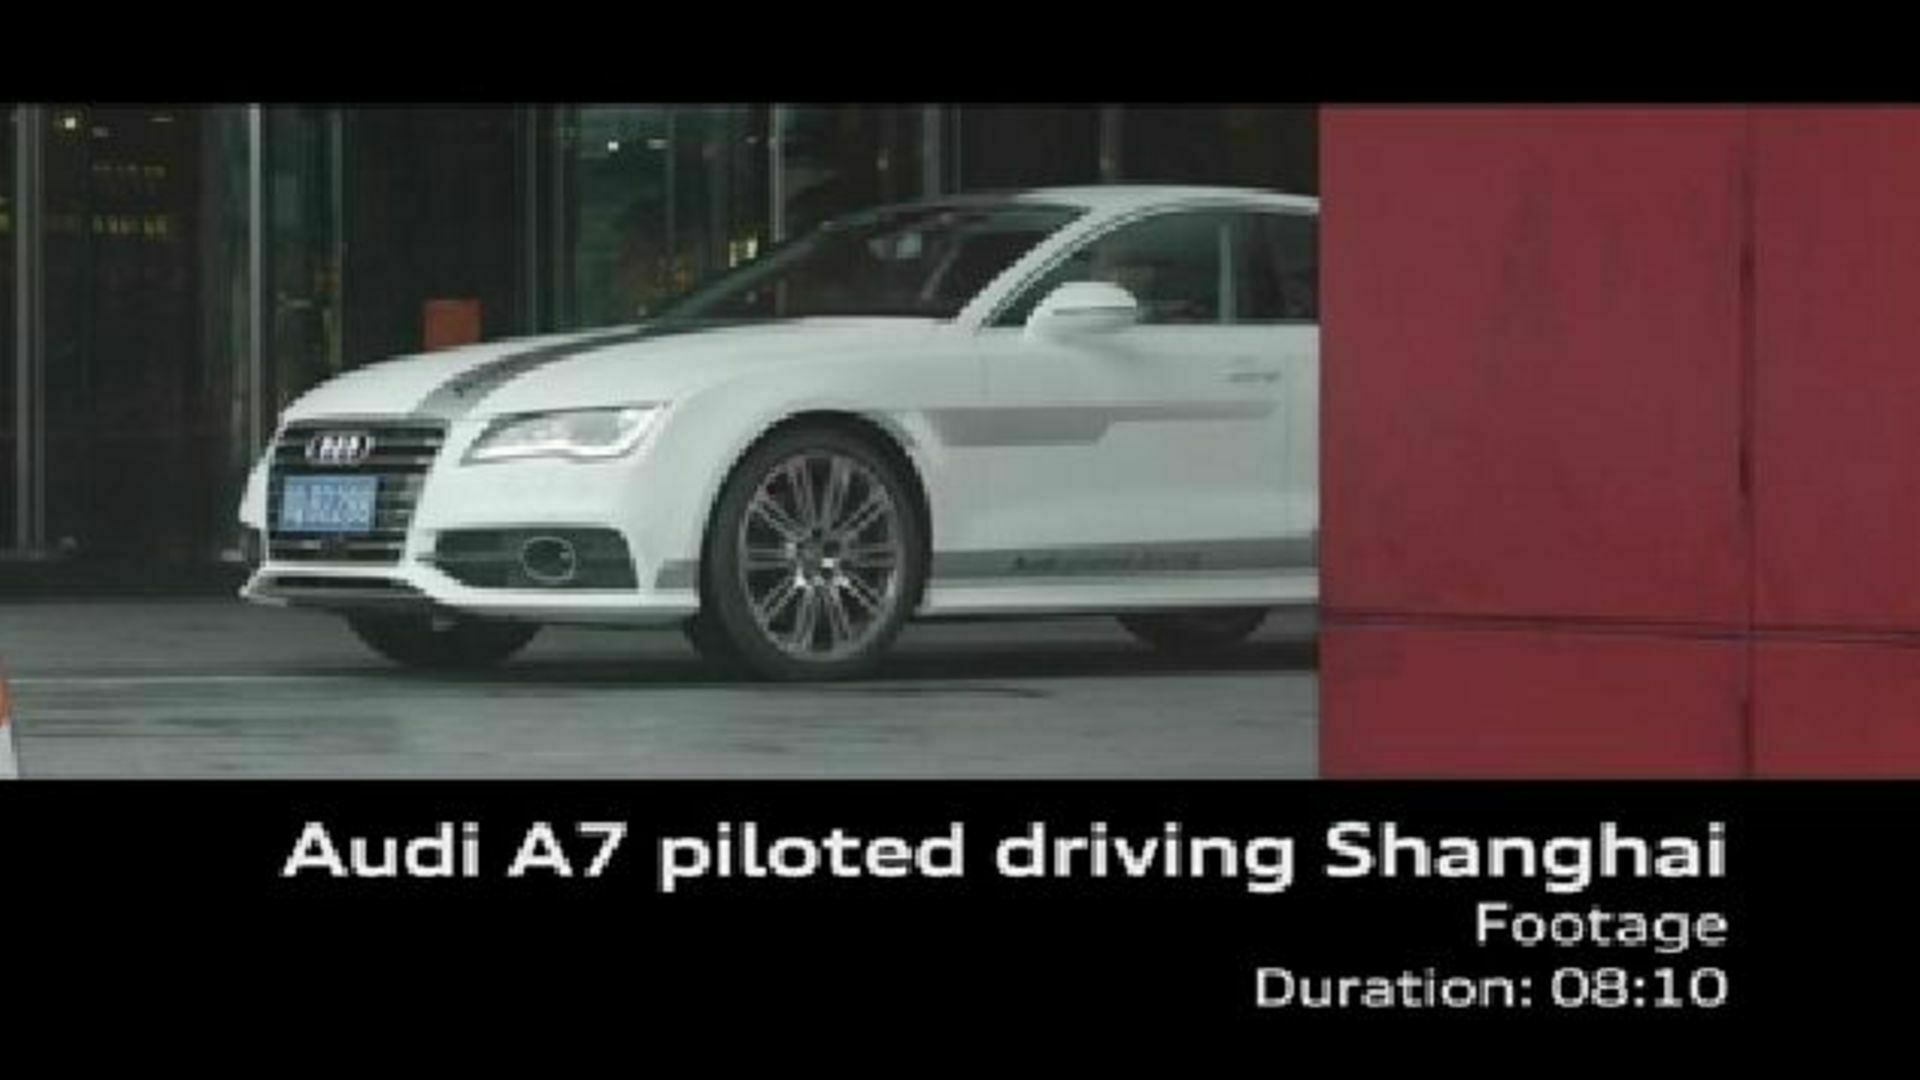 Audi A7 piloted driving Shanghai Footage